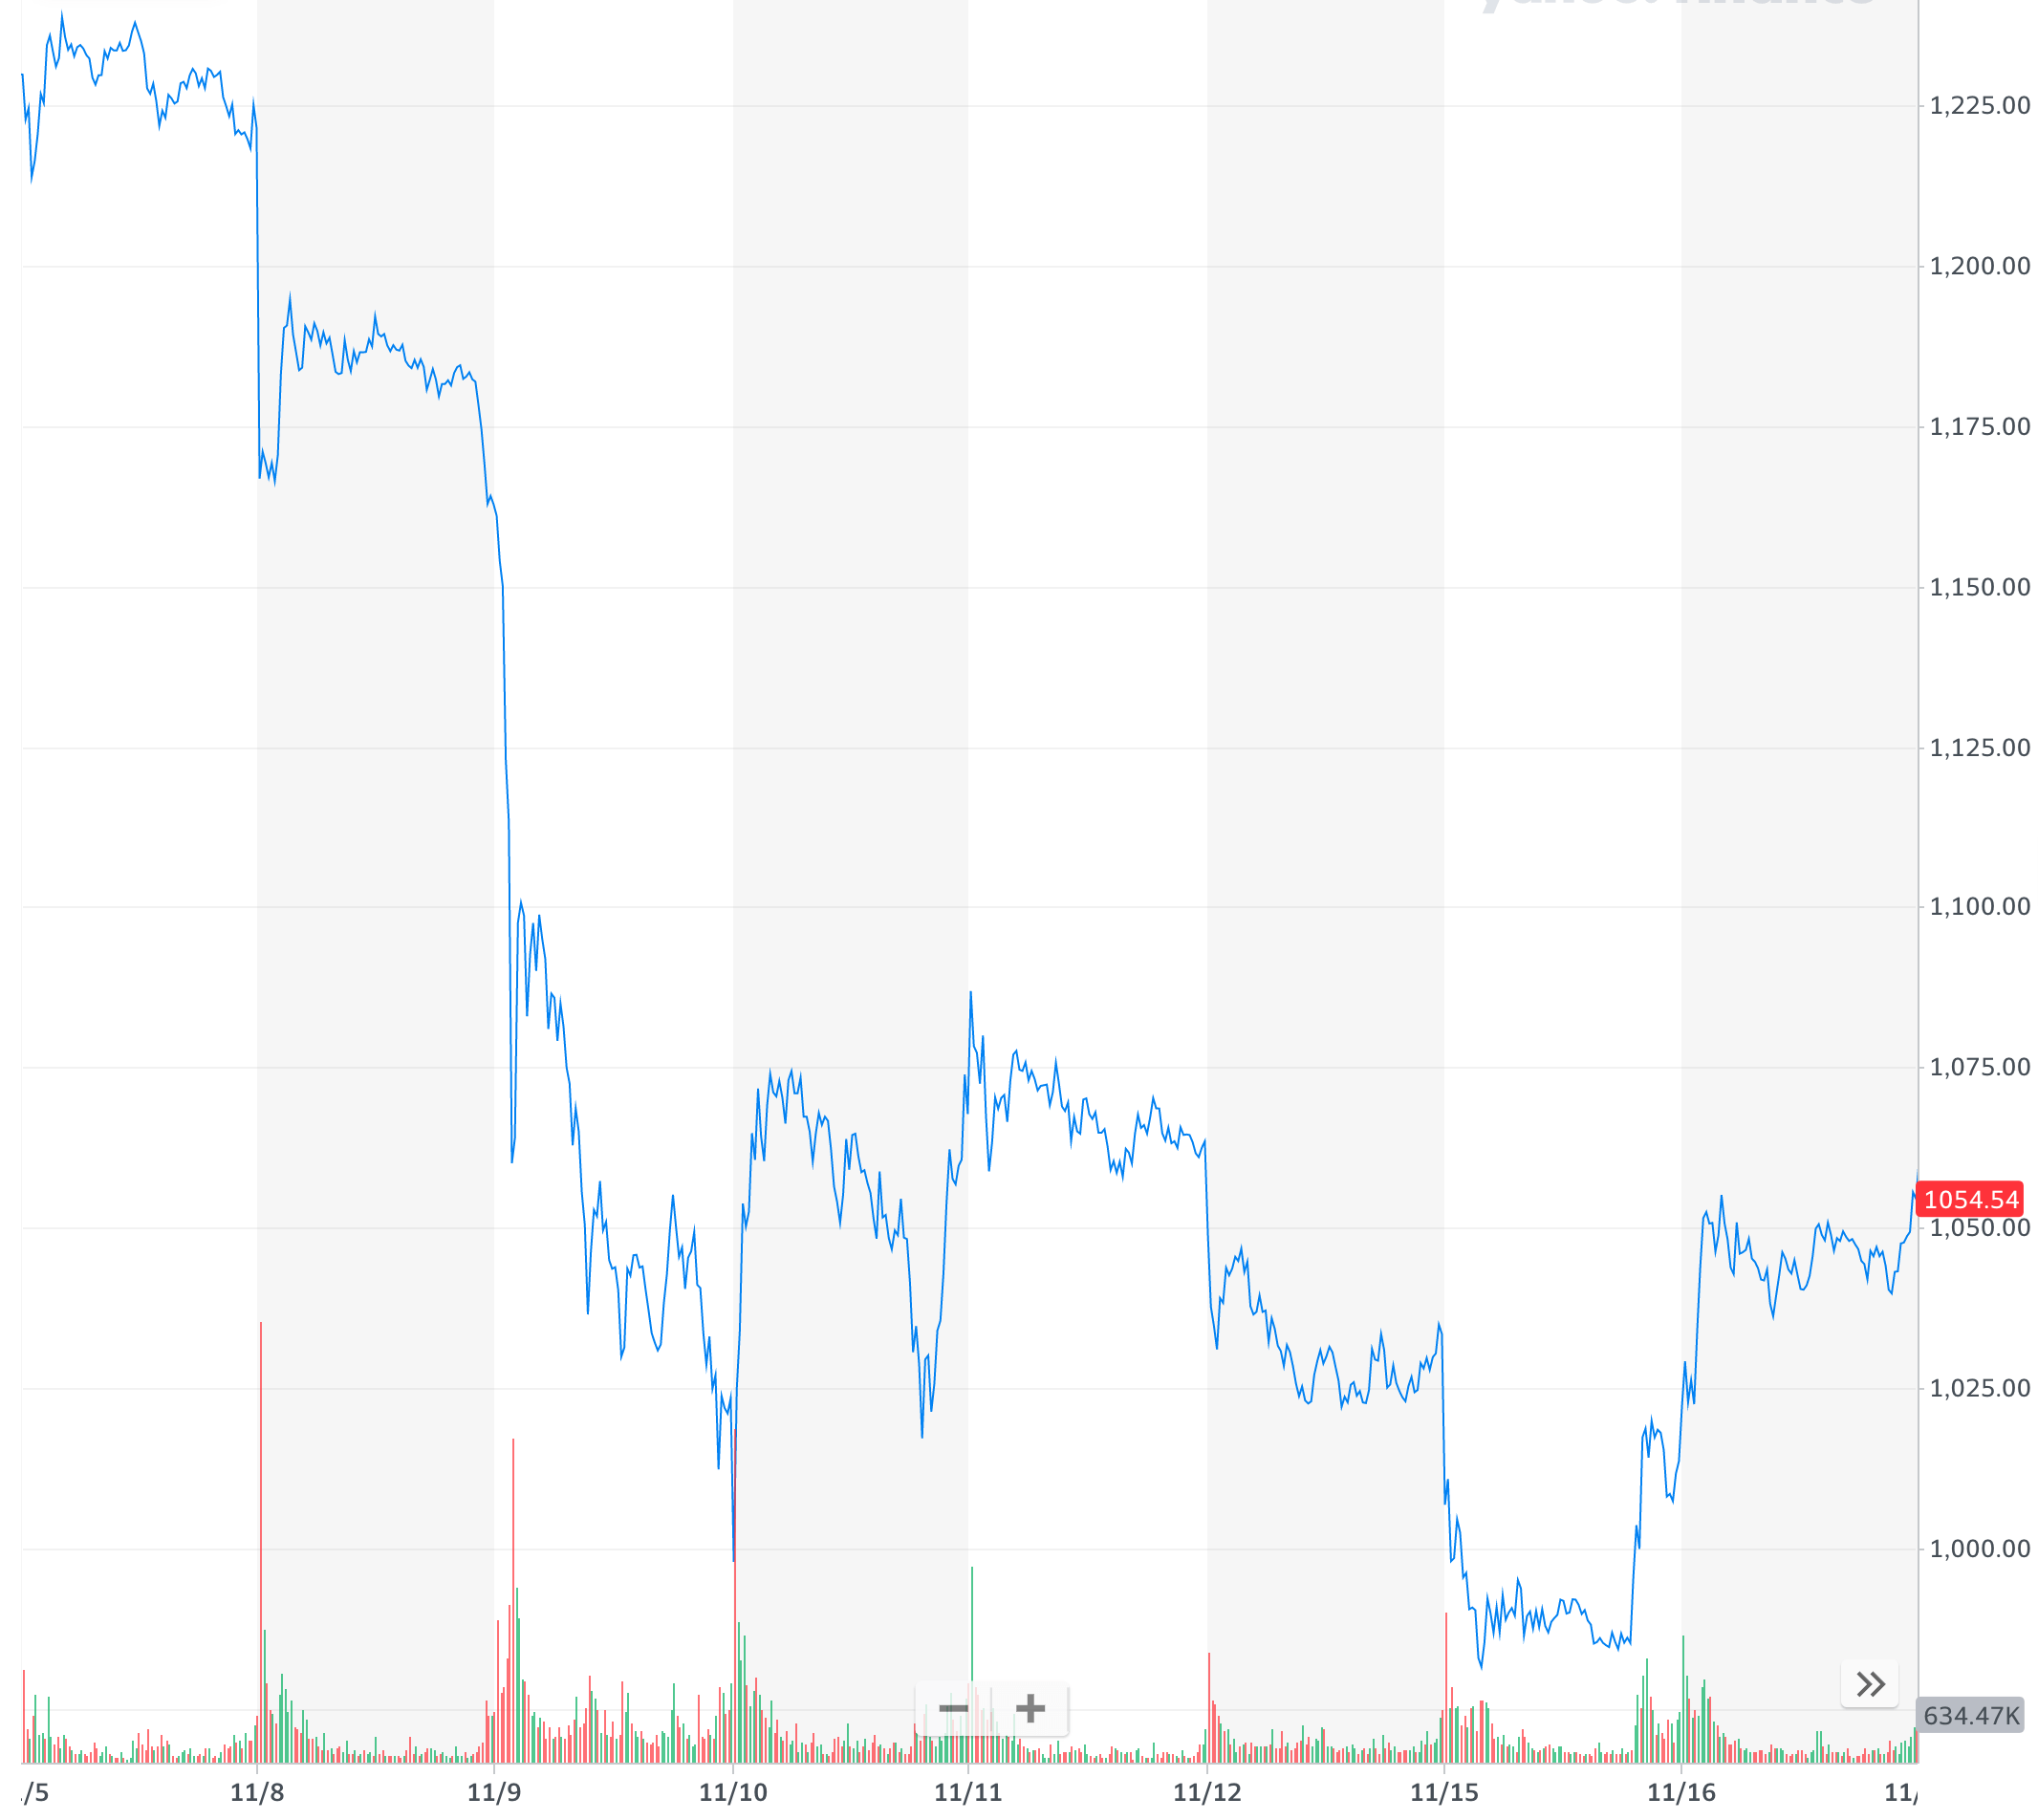 Tesla share price from November 5 to November 16. It can be seen that from November 5, after Musk's tweet, the stock drops from $1120 to below $1000. By November 12, the price is able to hold its position around $980. On November 15, the stock sinks again to $920. On November 16, the stock recovers slightly to $950.